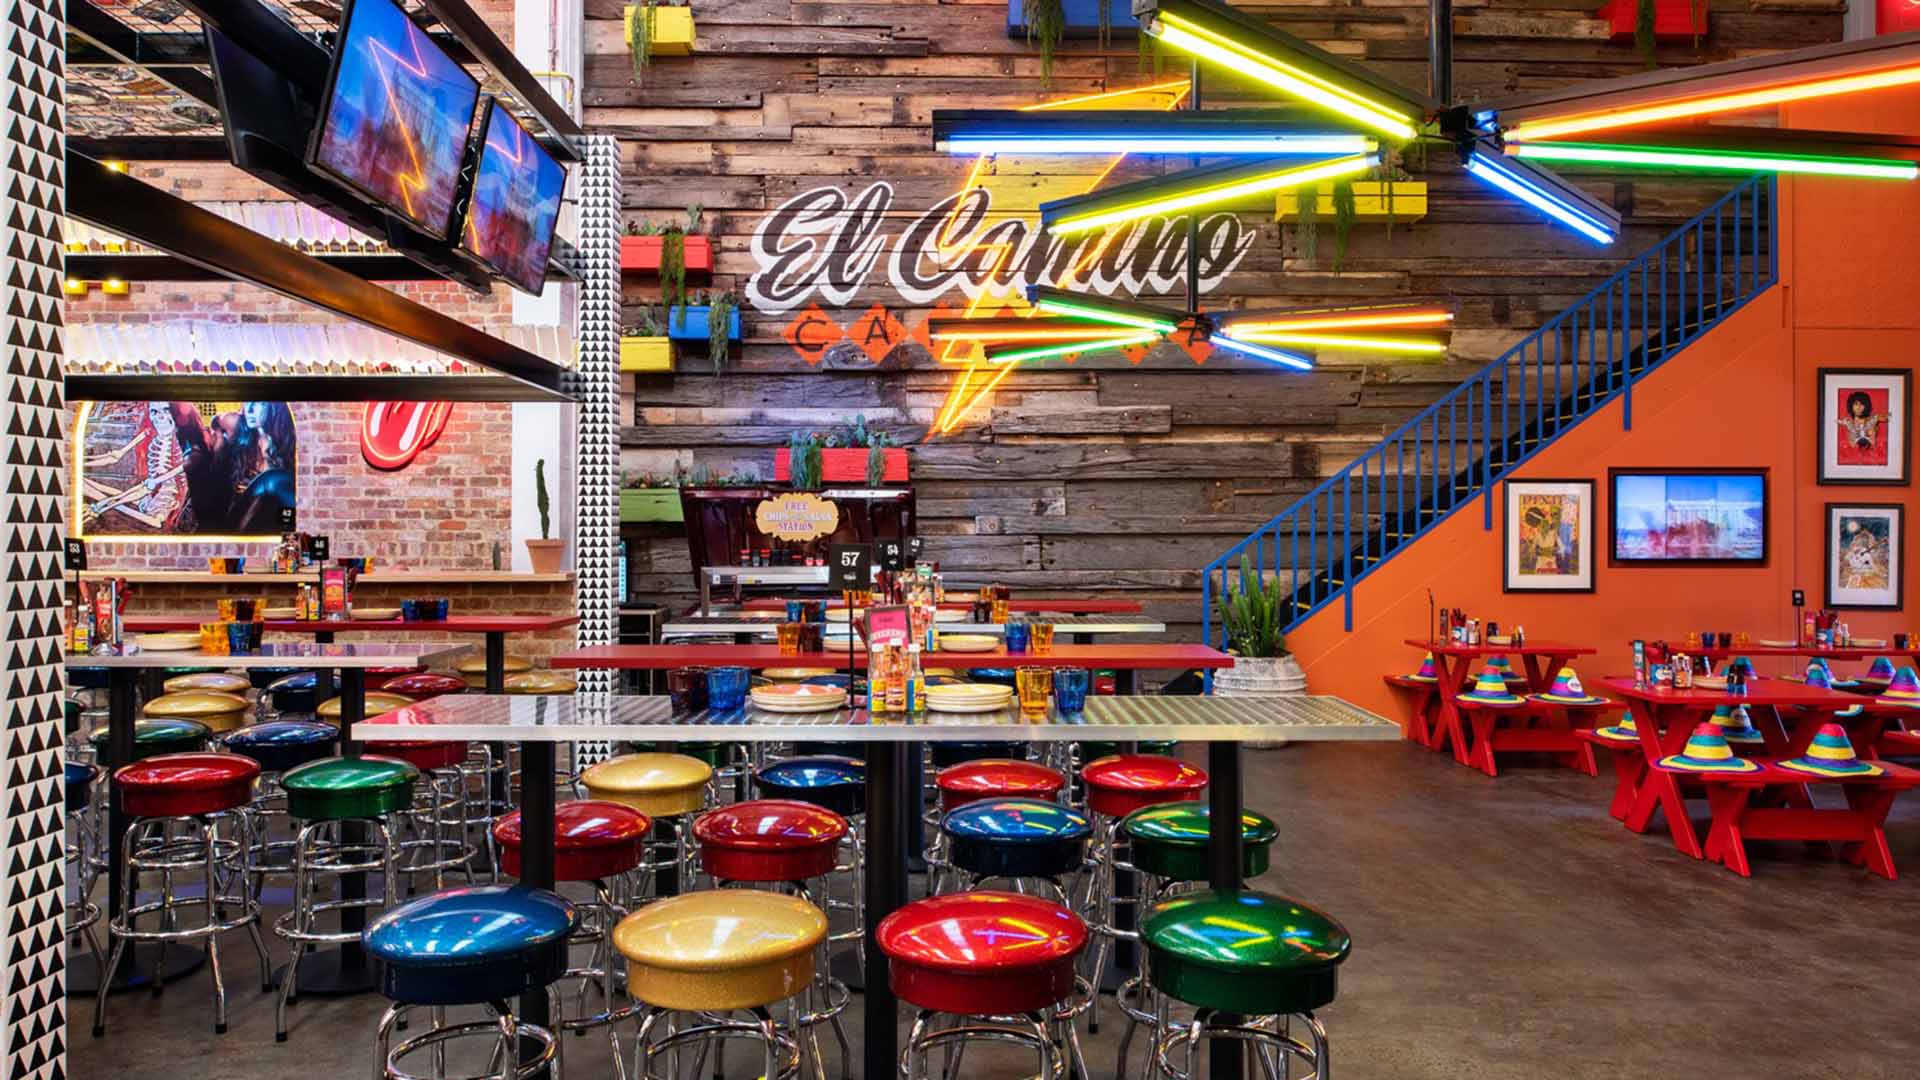 El Camino Cantina Is Opening Its Next Colourful Tex-Mex Joint in Brisbane's North